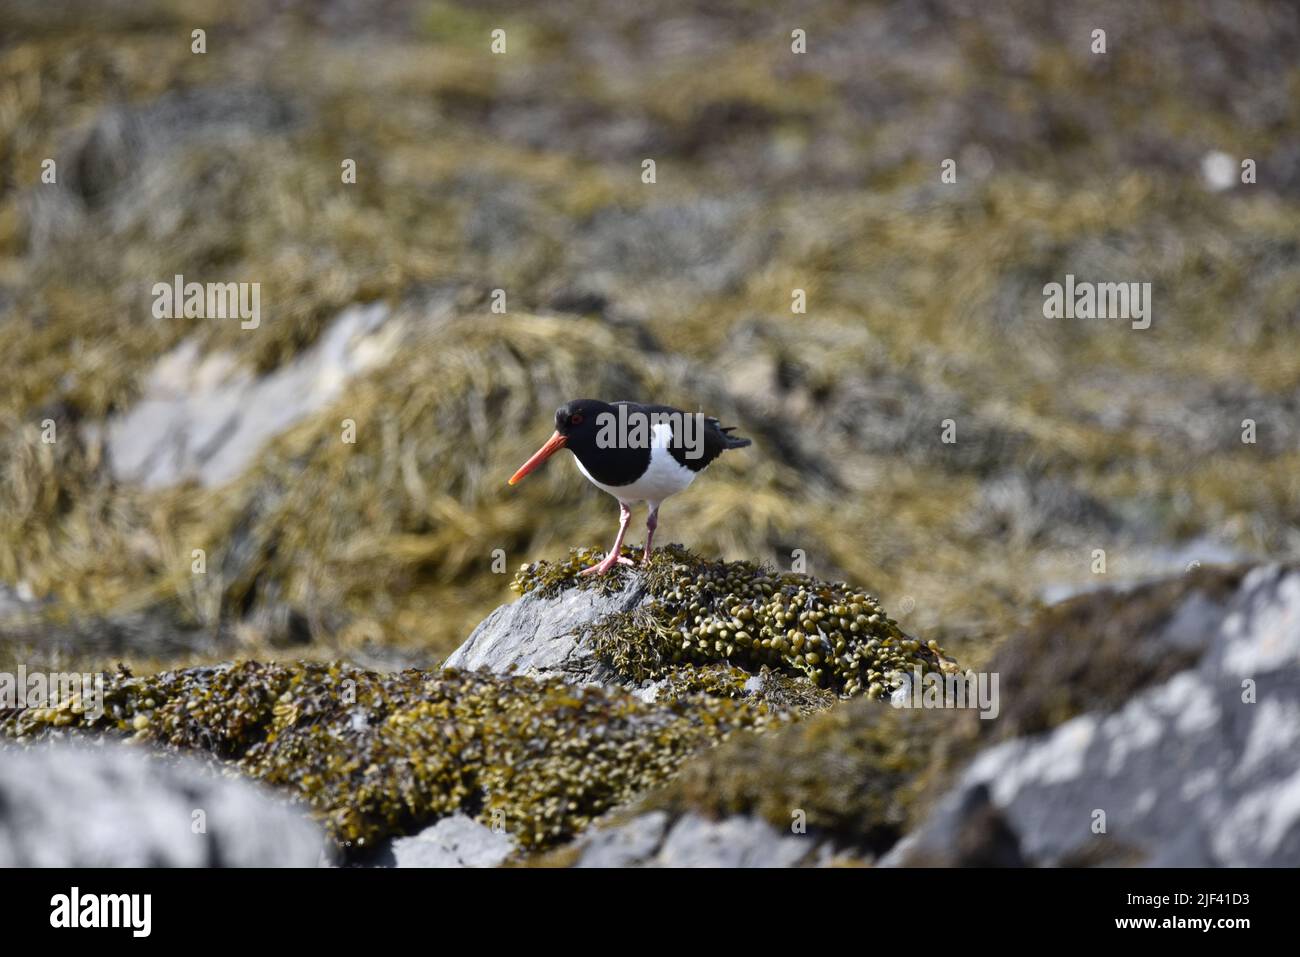 Middle Foreground, Left-Profile Image of a Eurasian Oystercatcher (Haematopus ostralegus) Looking Down From Rocks on the Isle of Man Coast, UK, June Stock Photo